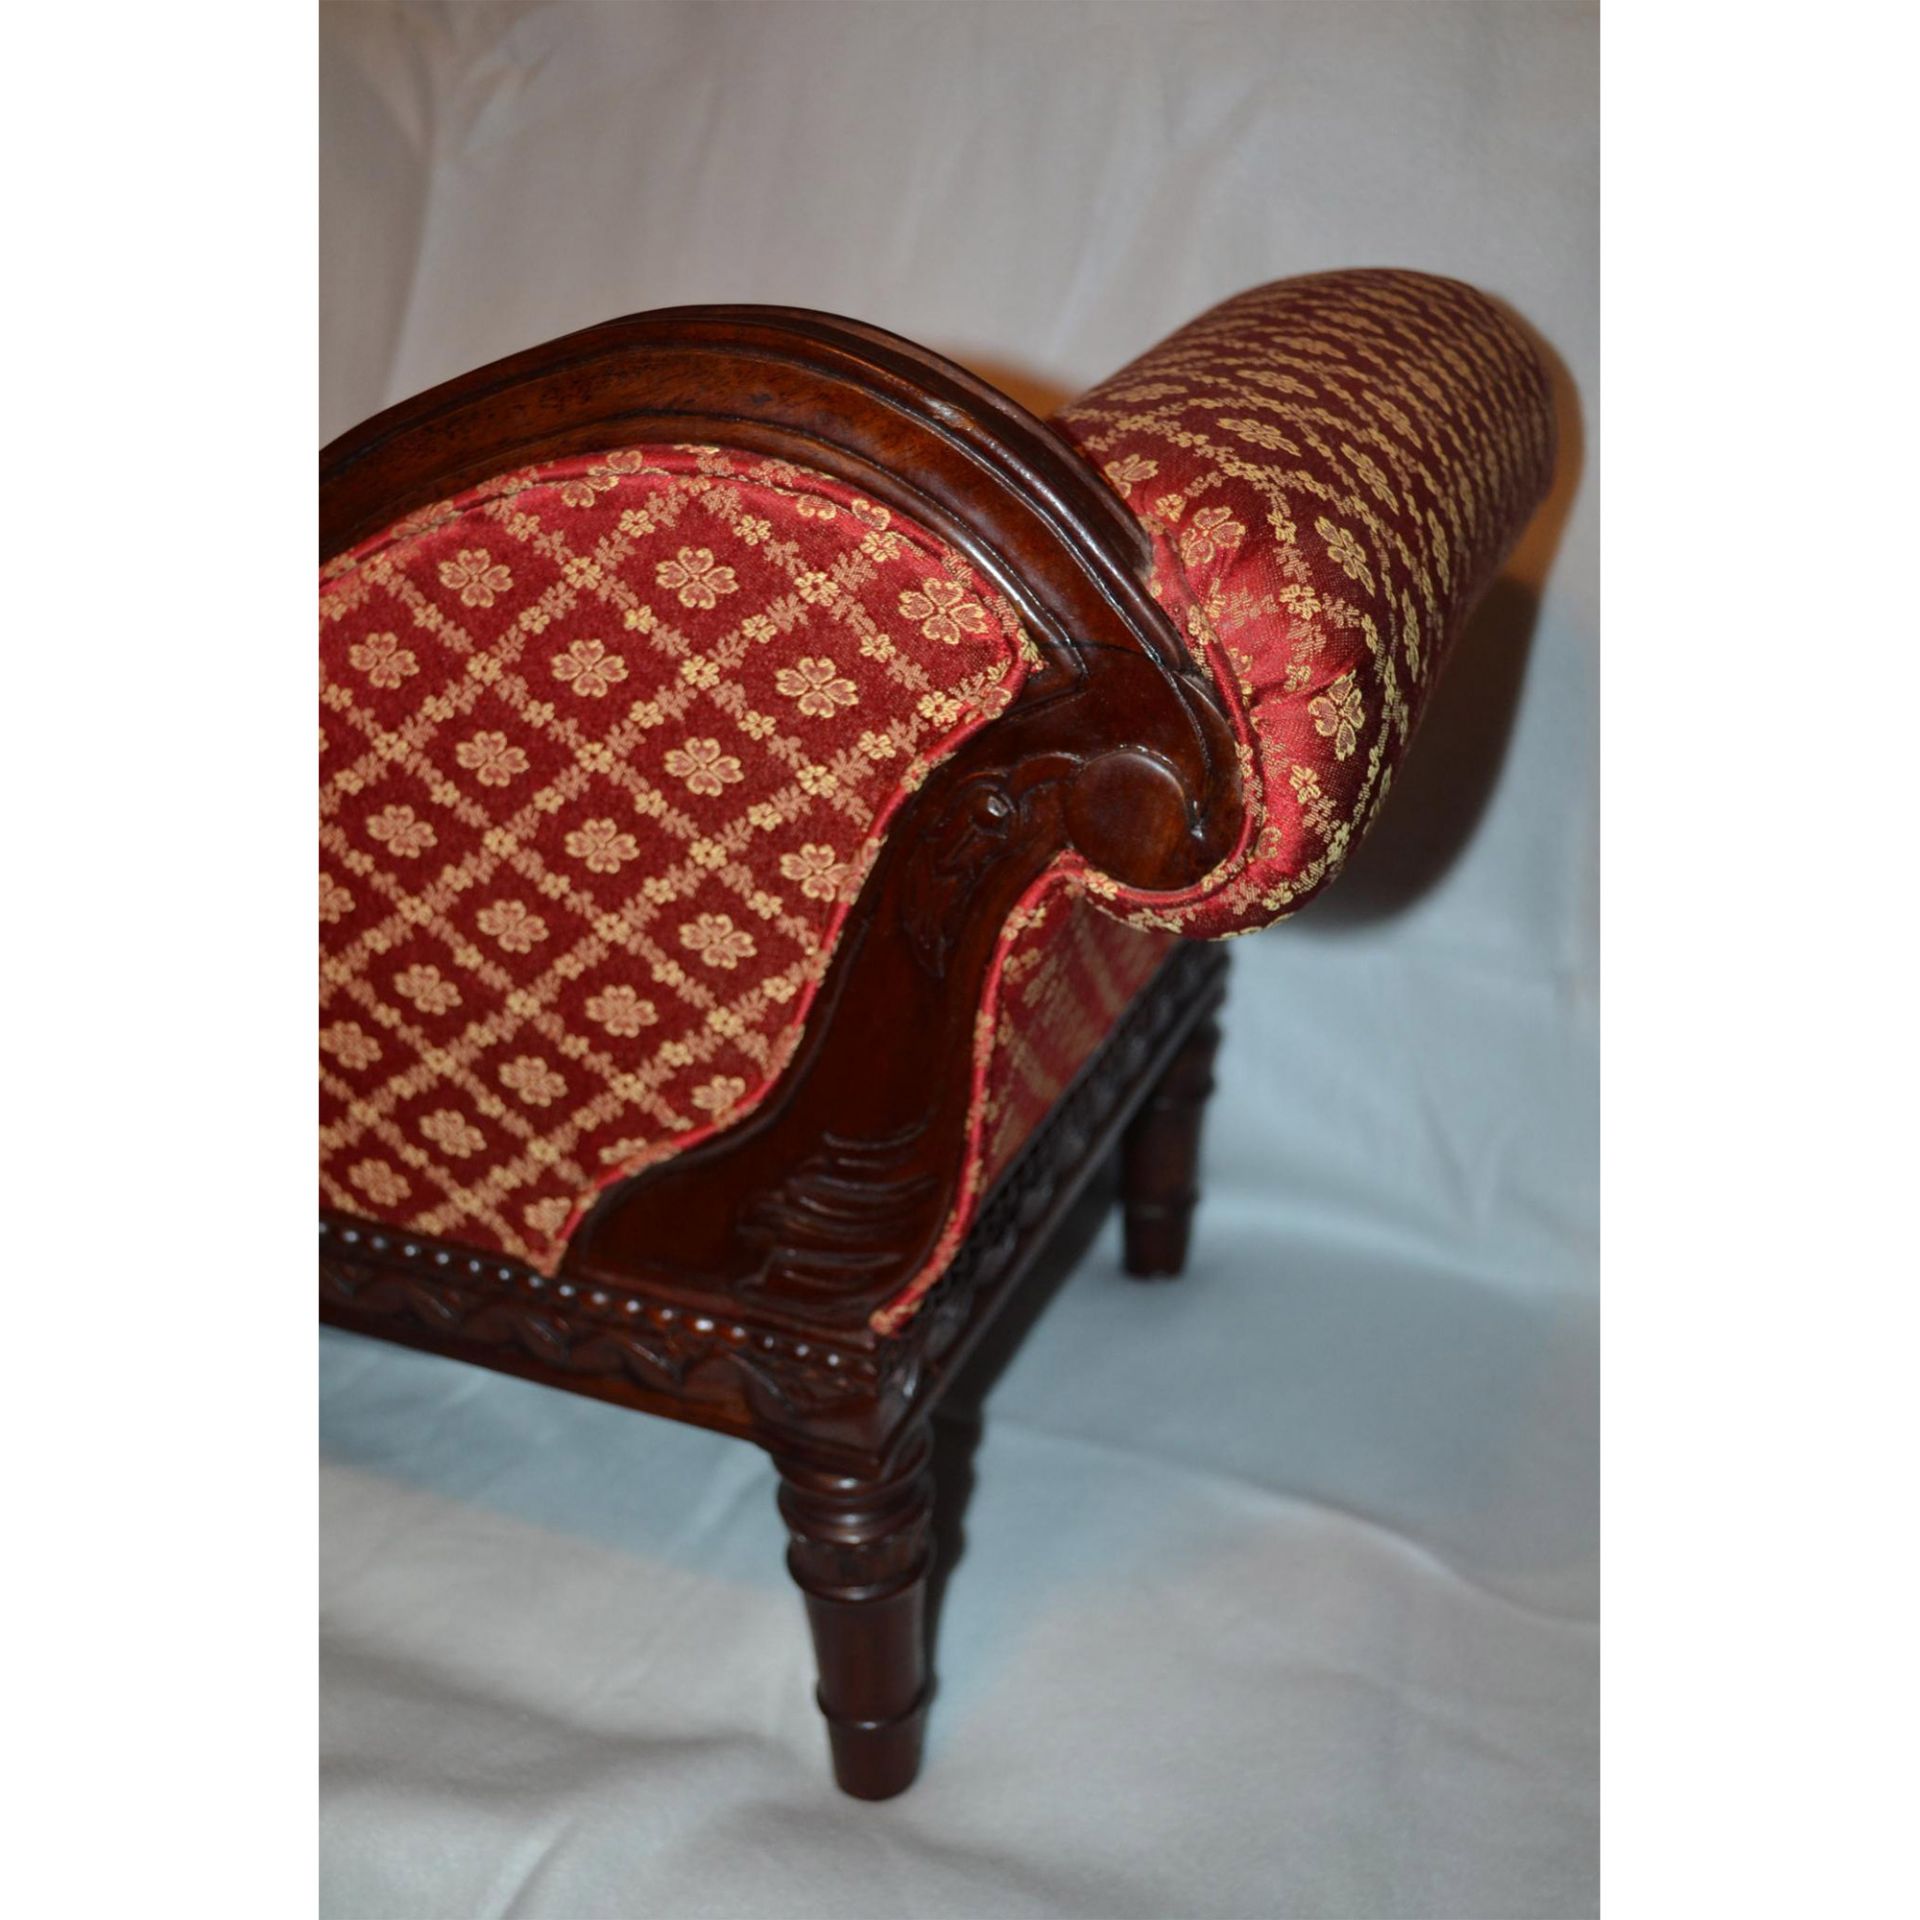 Miniature European Mahogany Hand Carved And Crafted Swan Sofa, Upholstered In Red/Gold Pattern Damas - Image 5 of 5